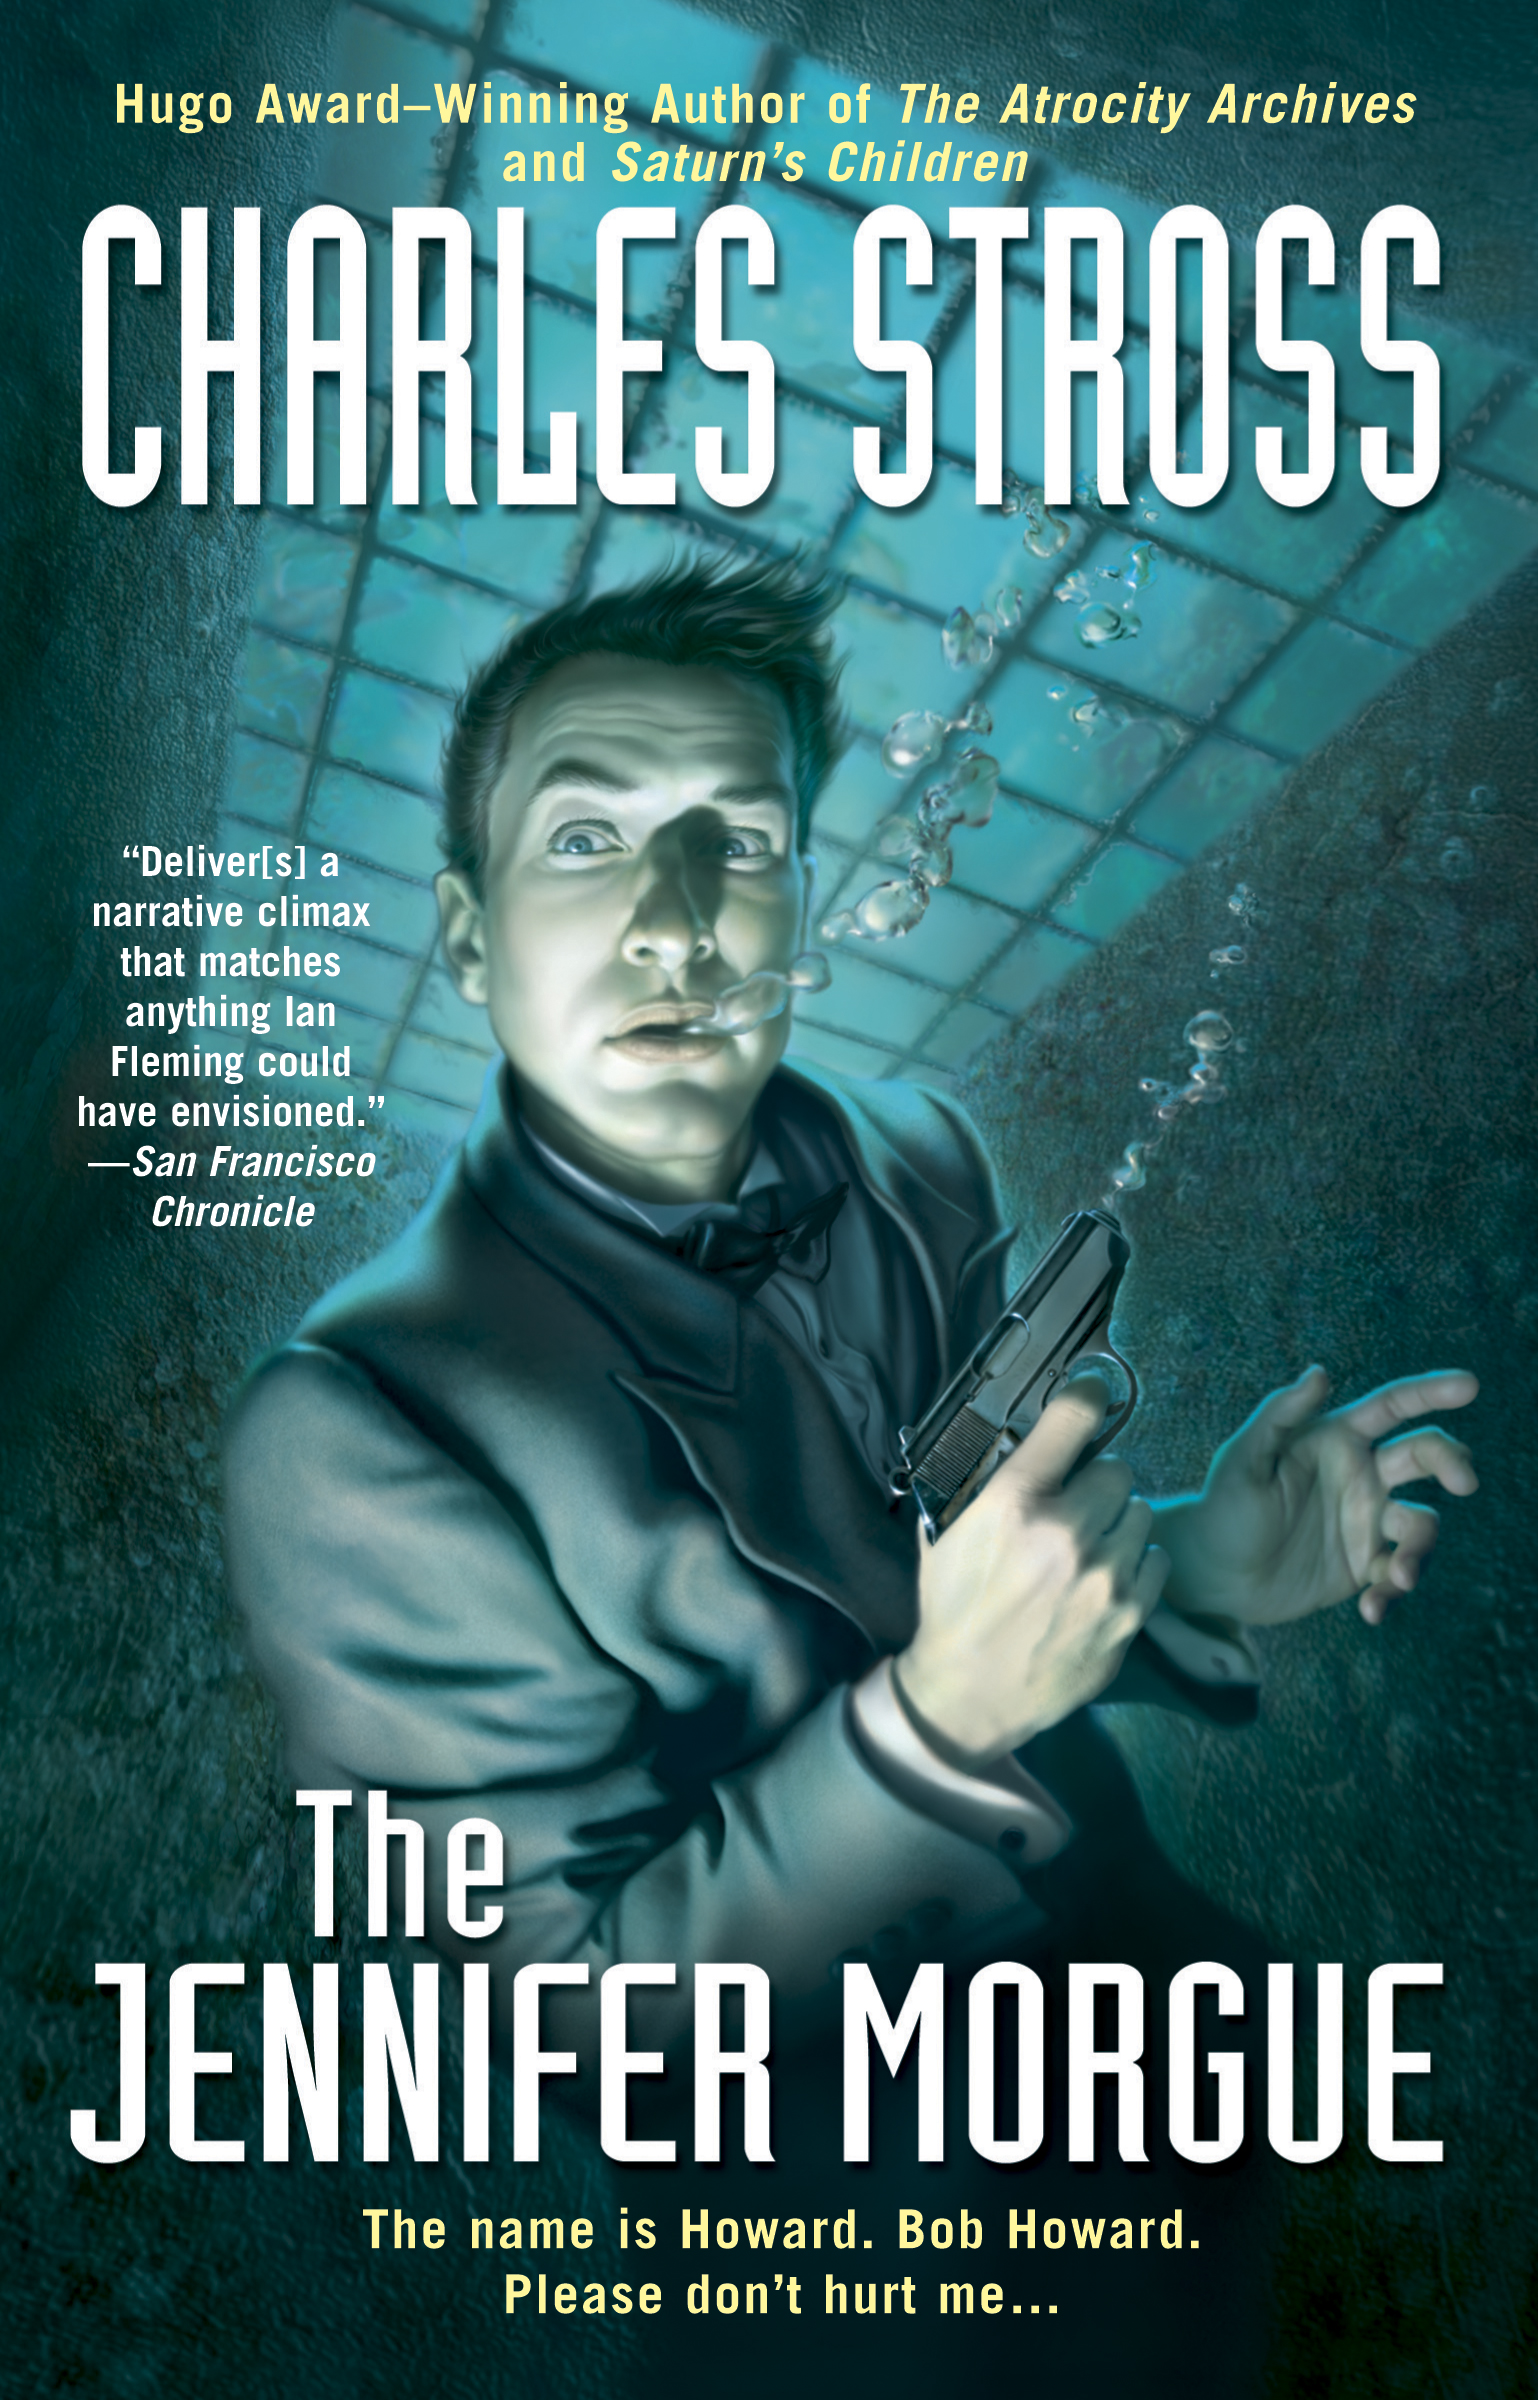 Bob, the main character of the novel, is suspended in a watery cage while wearing a business suit.